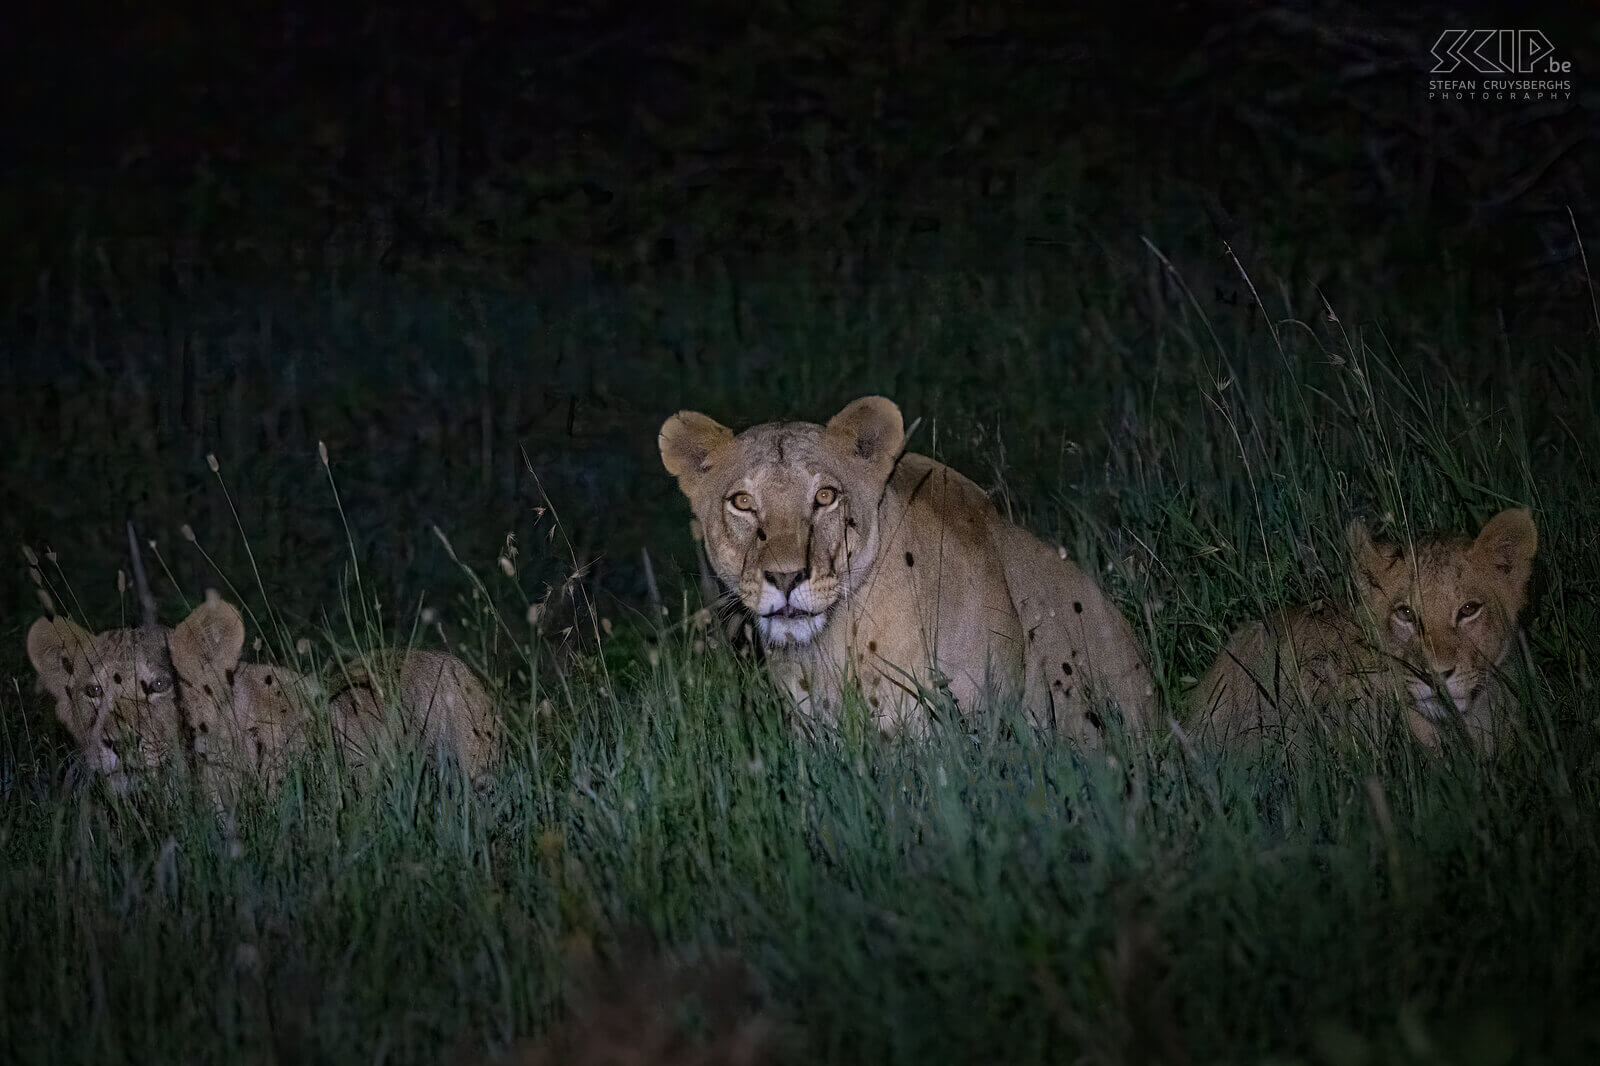 Solio - Lioness with cubs During a final night game drive in Solio we were able to follow a lioness with some cubs.  Stefan Cruysberghs